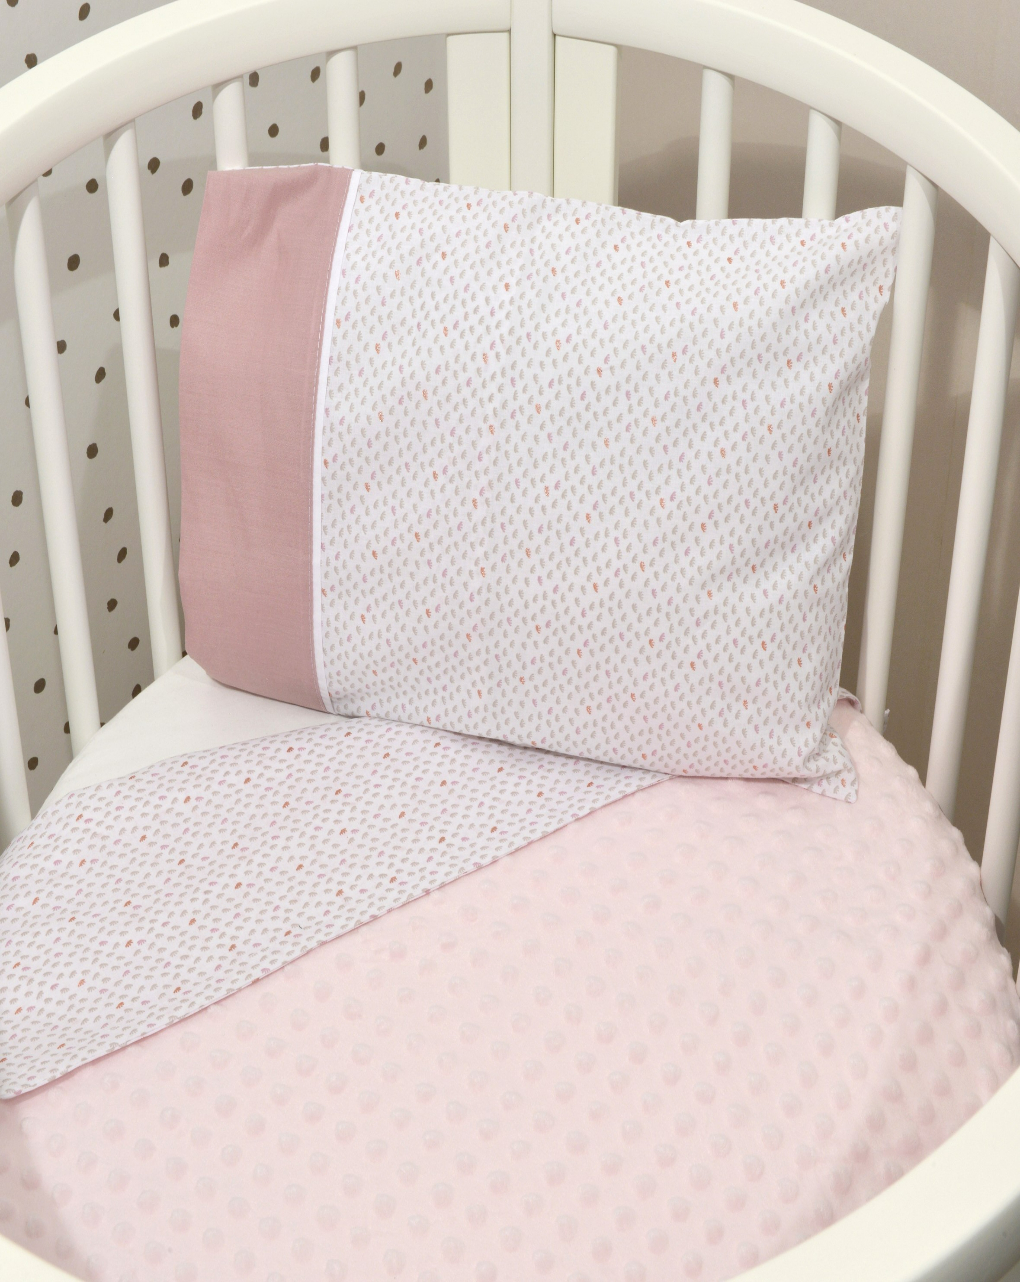 Baby oliver minky κουβέρτα αγκαλιάς dusty pink 46-6725-402 - BABY OLIVER